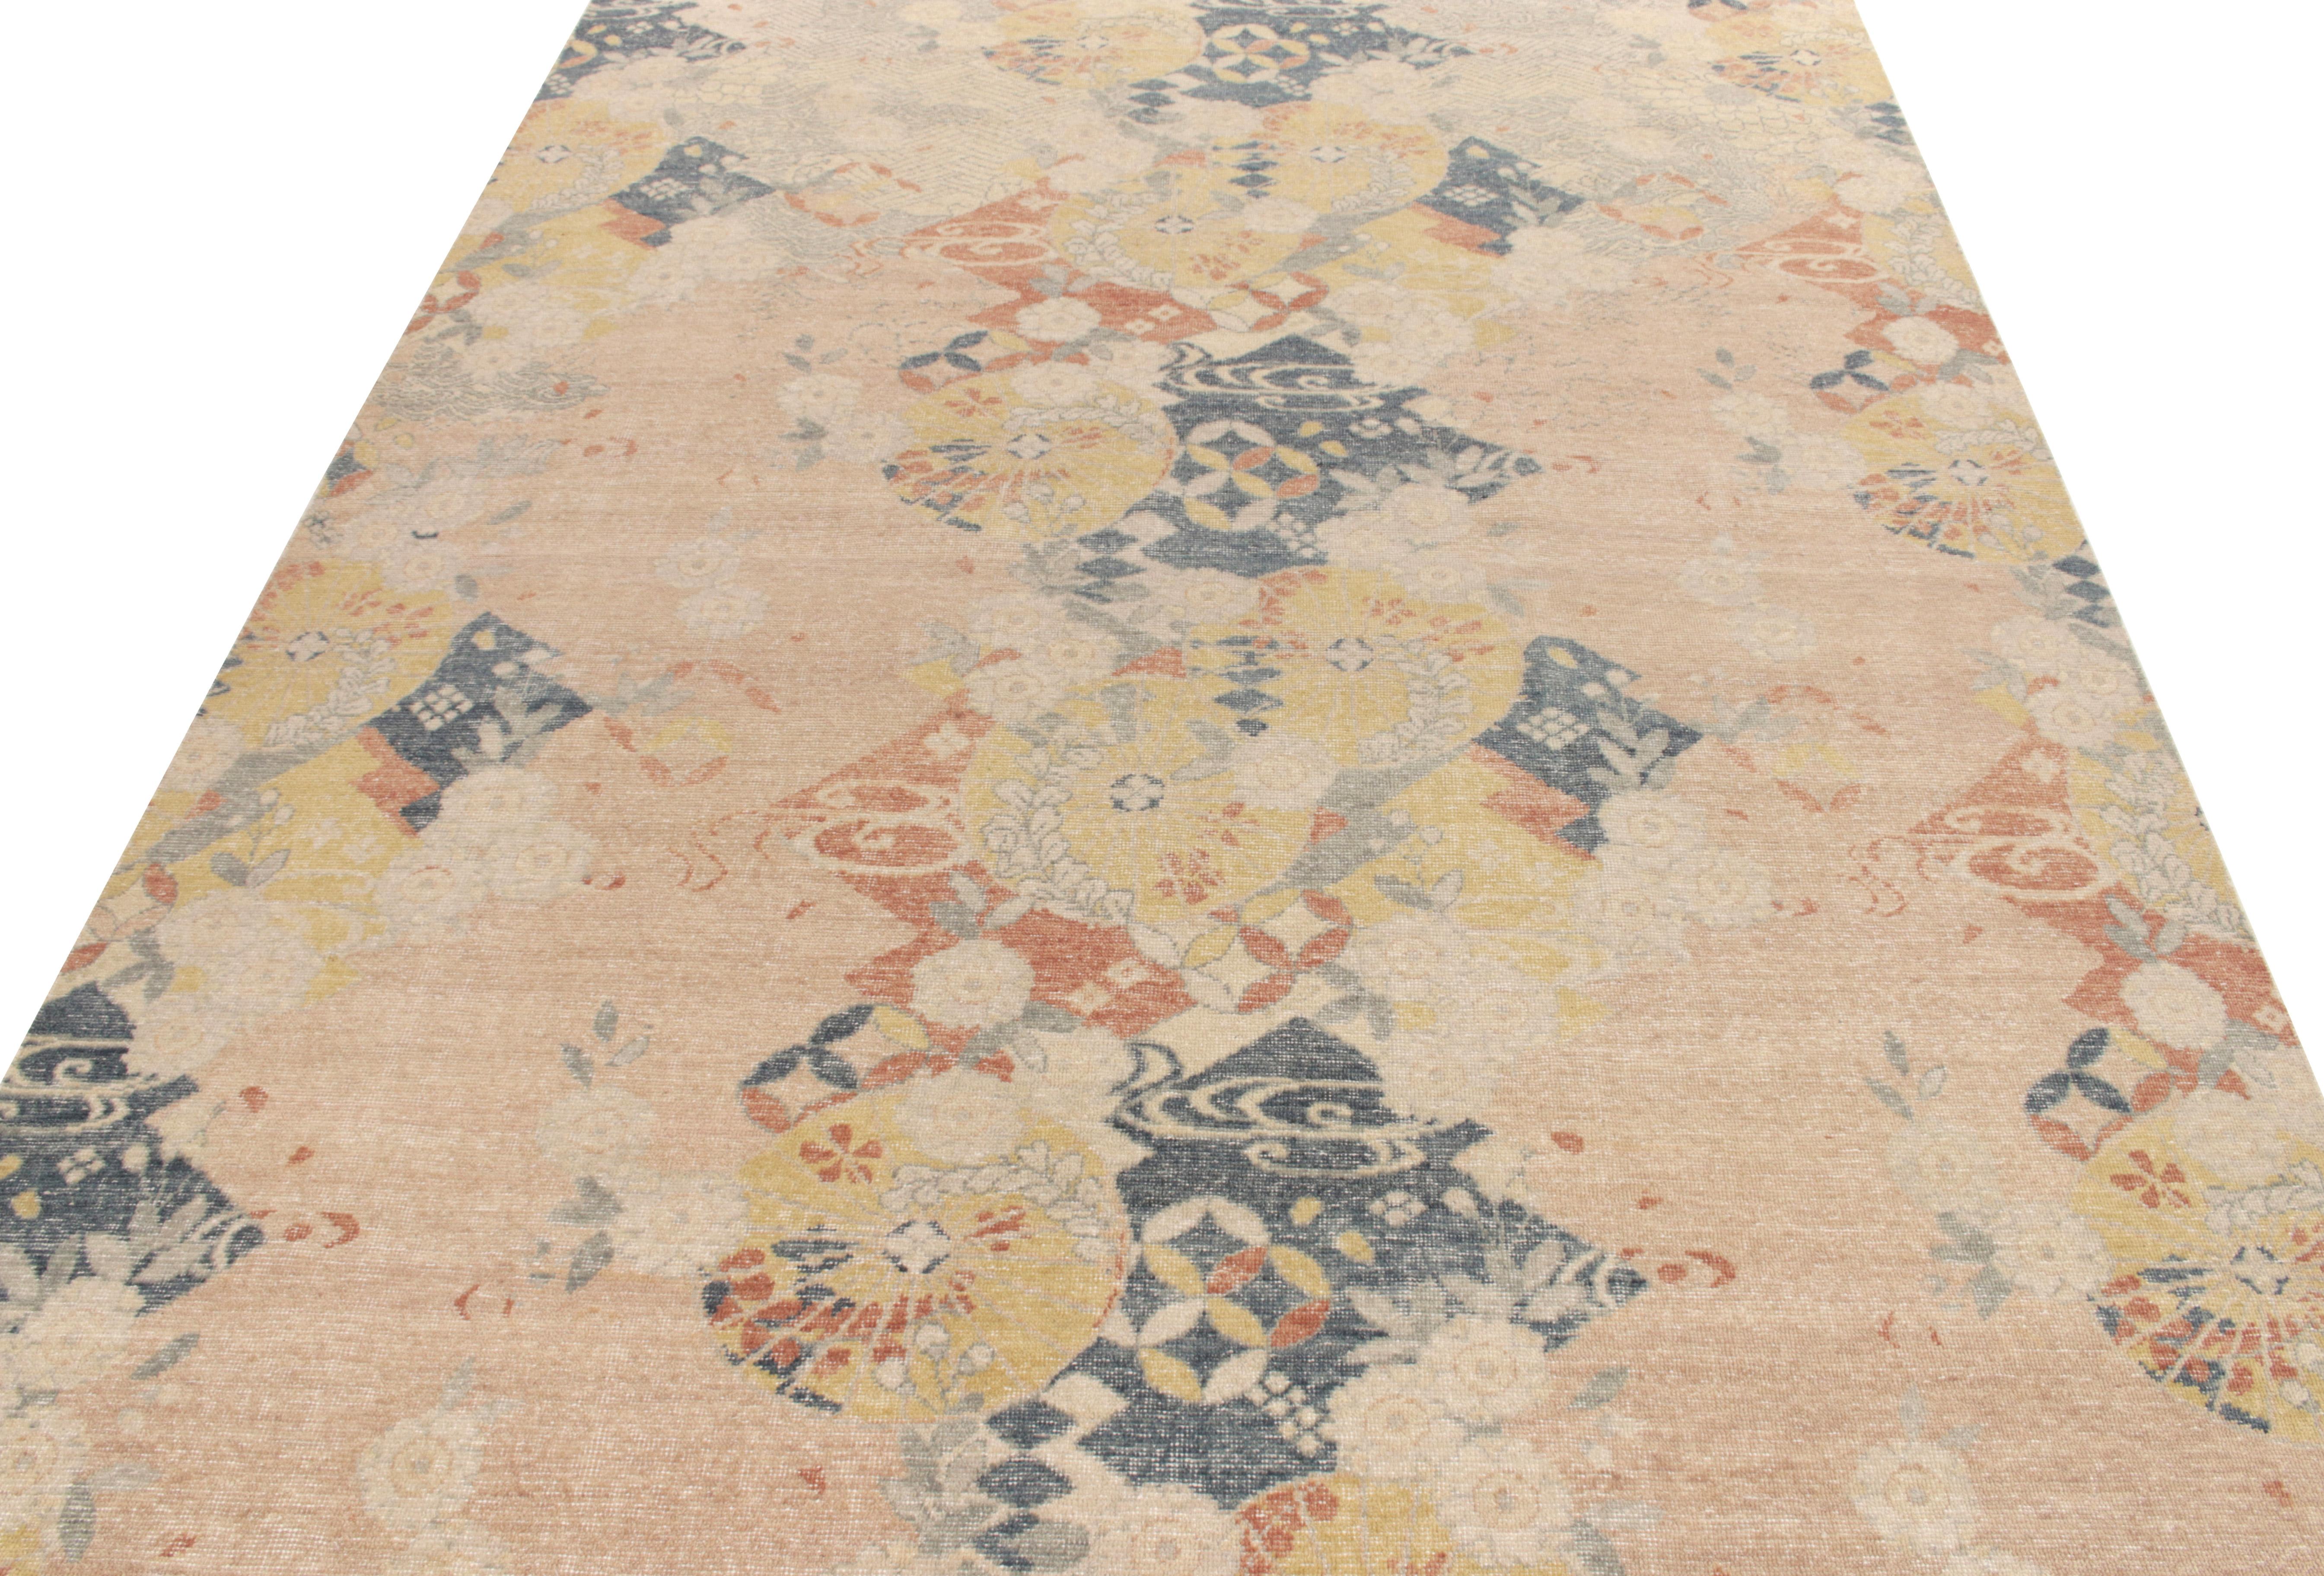 From Rug & Kilim’s Homage collection, a 9x12 distressed style rug with Japanese art deco inspirations playing in muted blue, cream, orange, pink and golden colorways naturally blending with abstract pattern for a shabby chic vibe on the contemporary